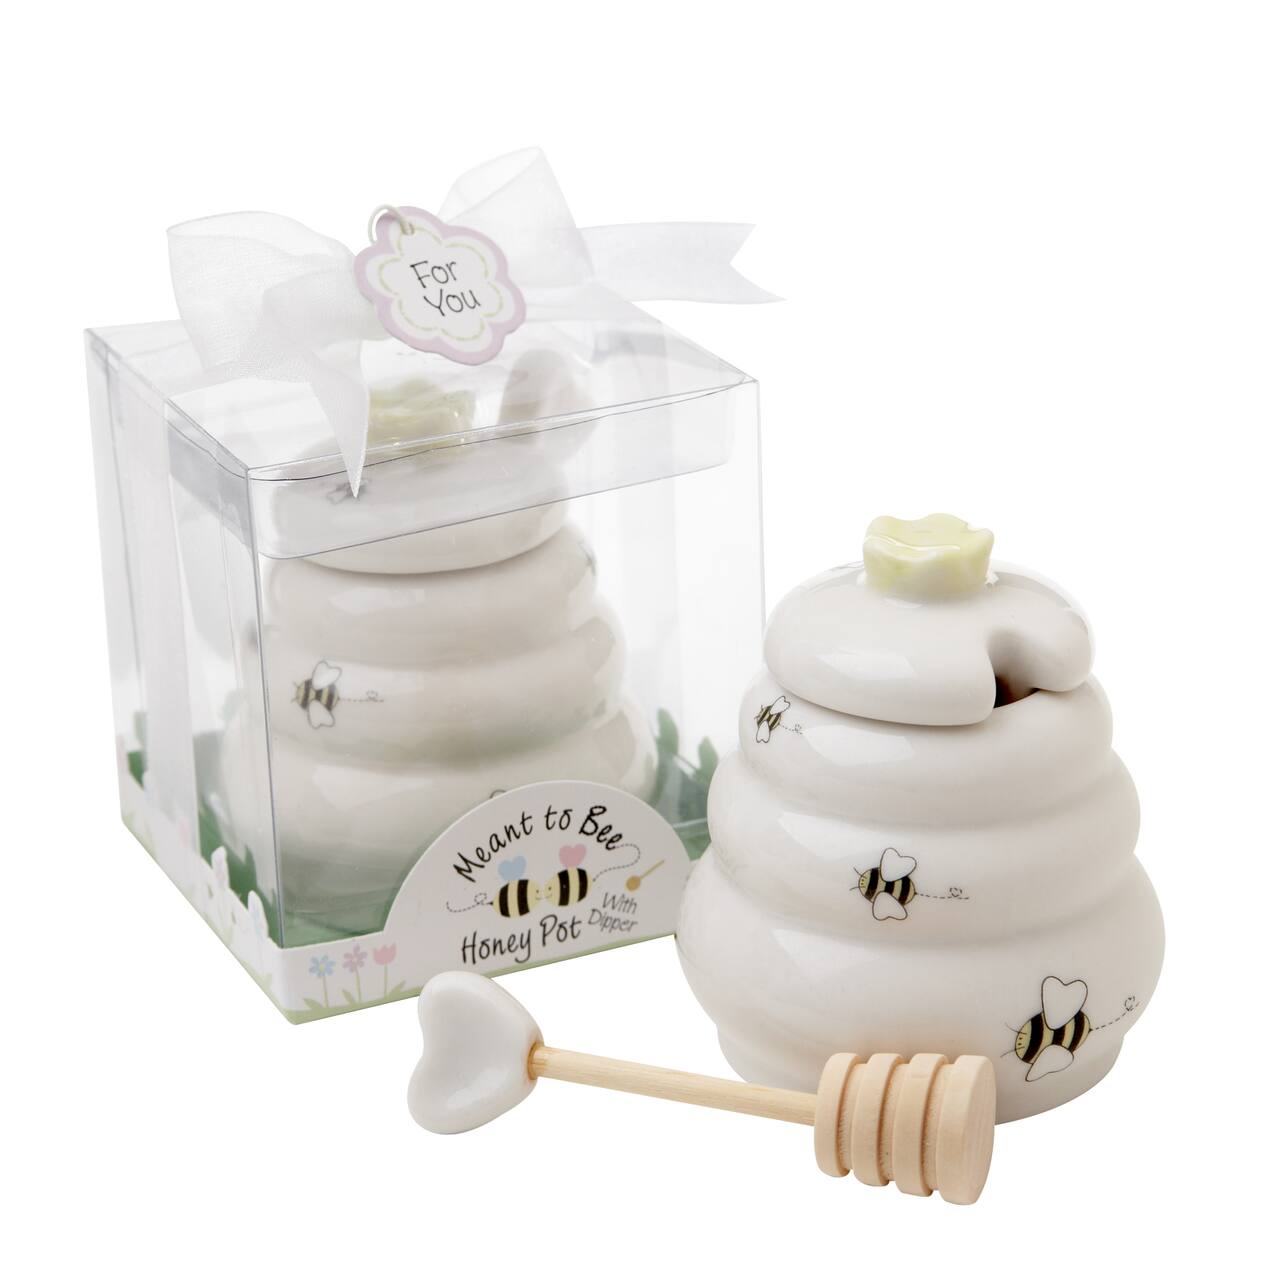 Kate Aspen&#xAE; &#x22;Meant to Bee&#x22; Ceramic Honey Pot with Wooden Dipper, 2ct.